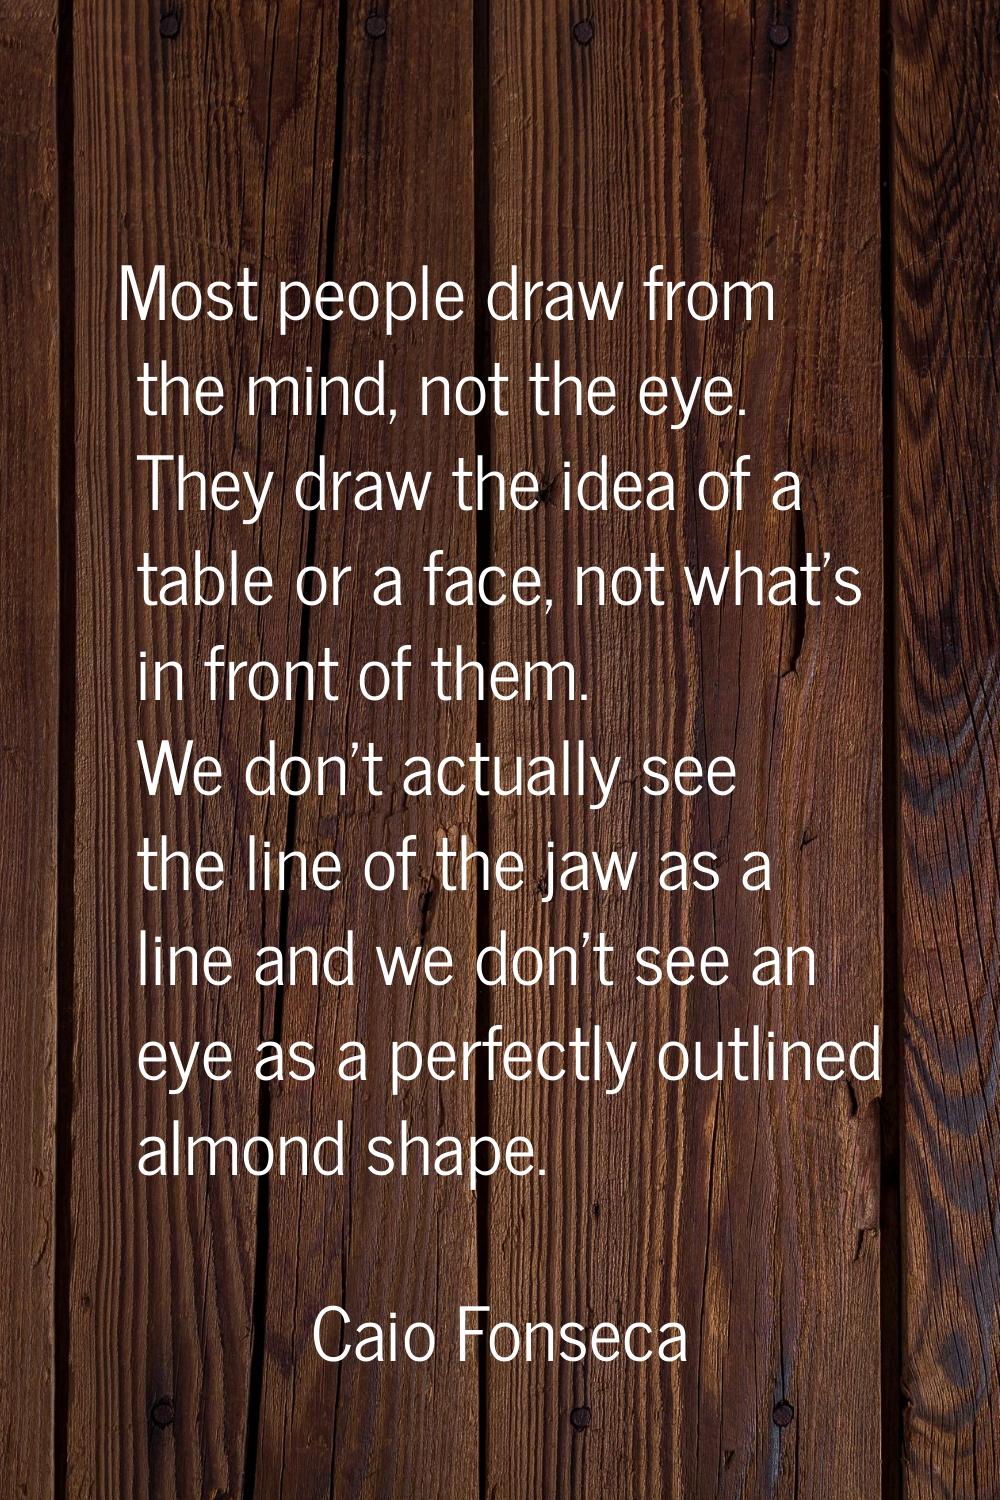 Most people draw from the mind, not the eye. They draw the idea of a table or a face, not what's in